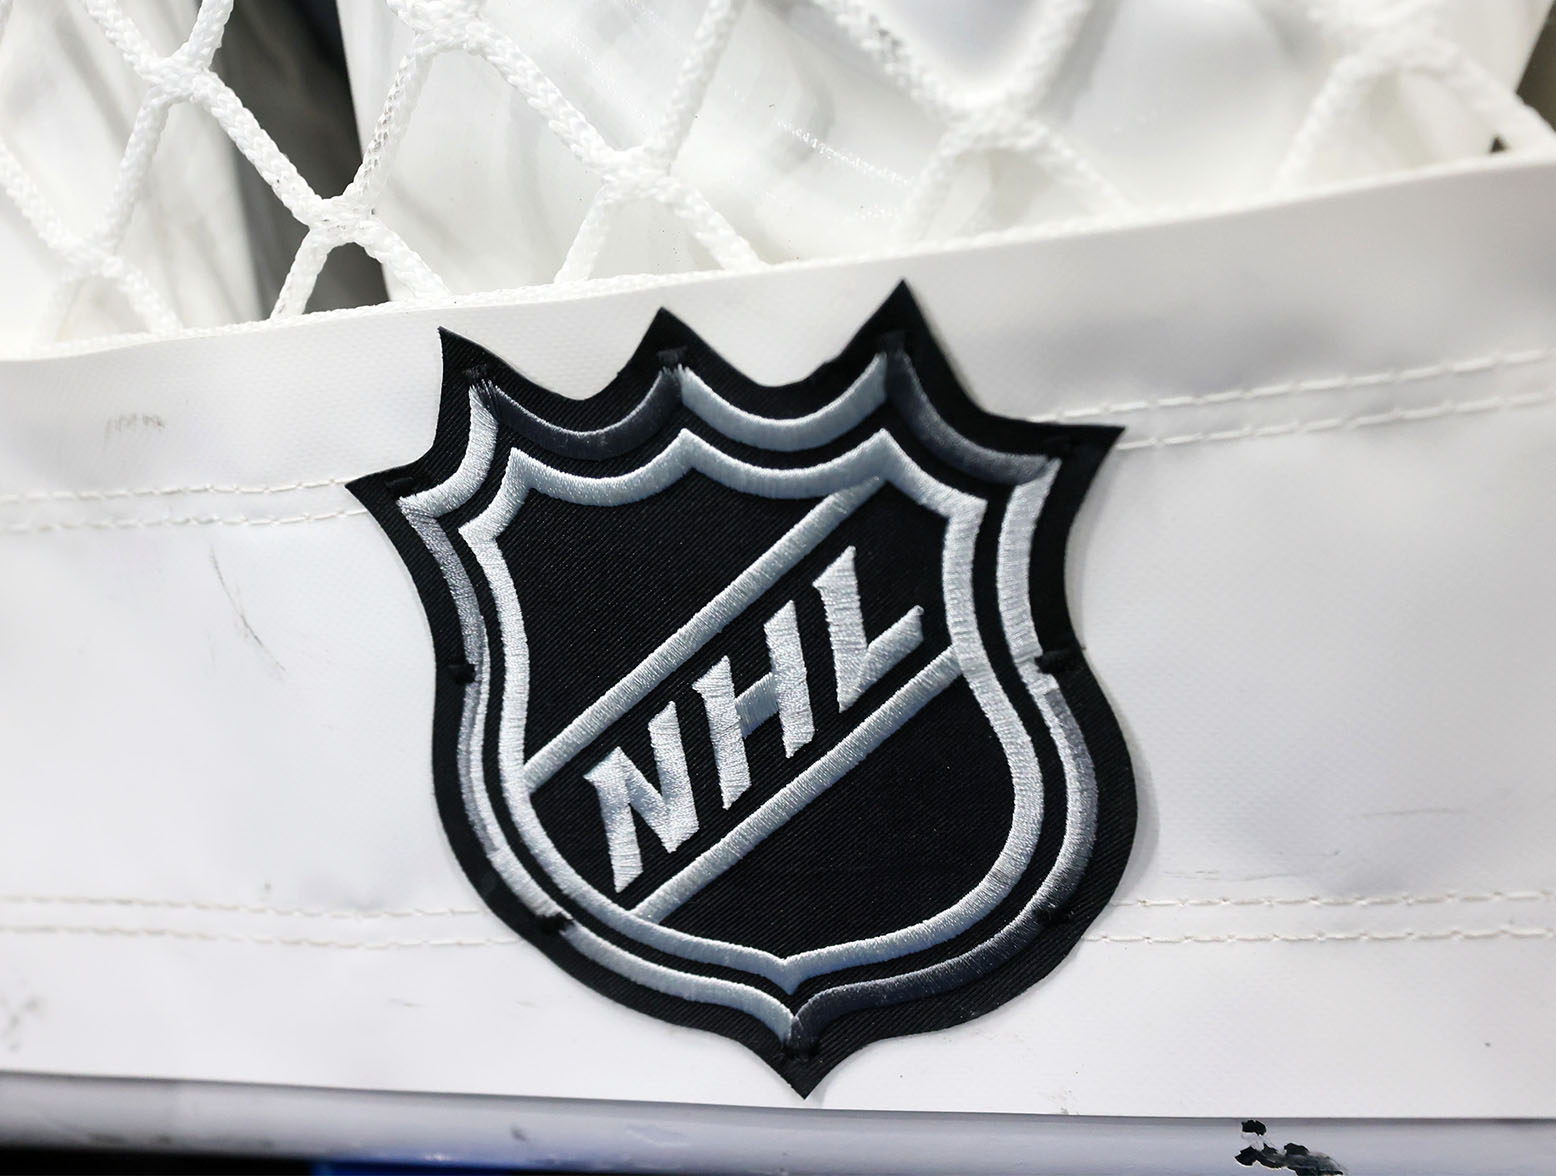 A closeup view of the NHL logo on a hockey net prior to an NHL game. (Bruce Bennett/Getty Images)